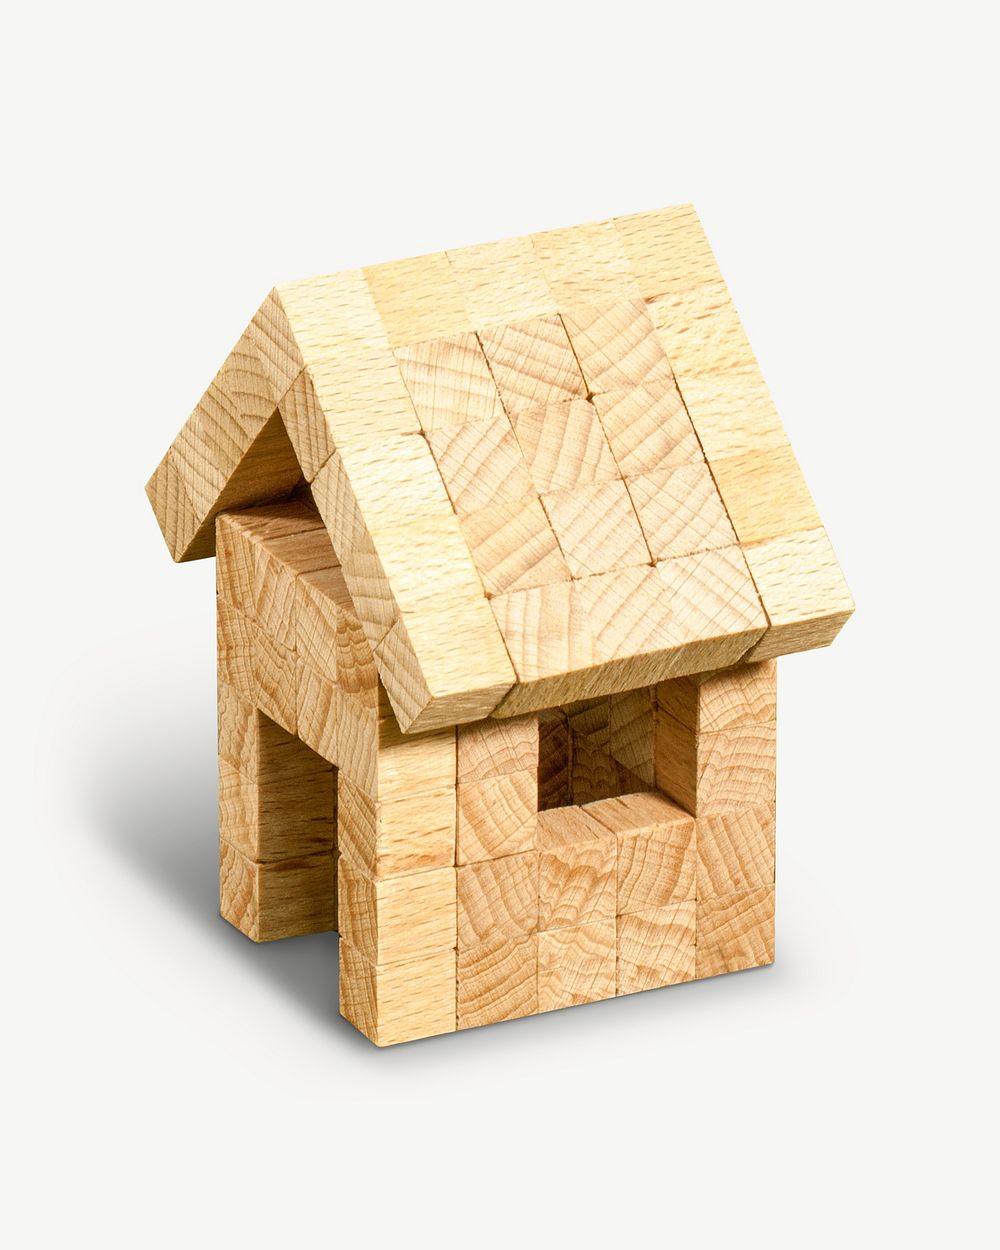 Wooden house blocks image, element graphic psd